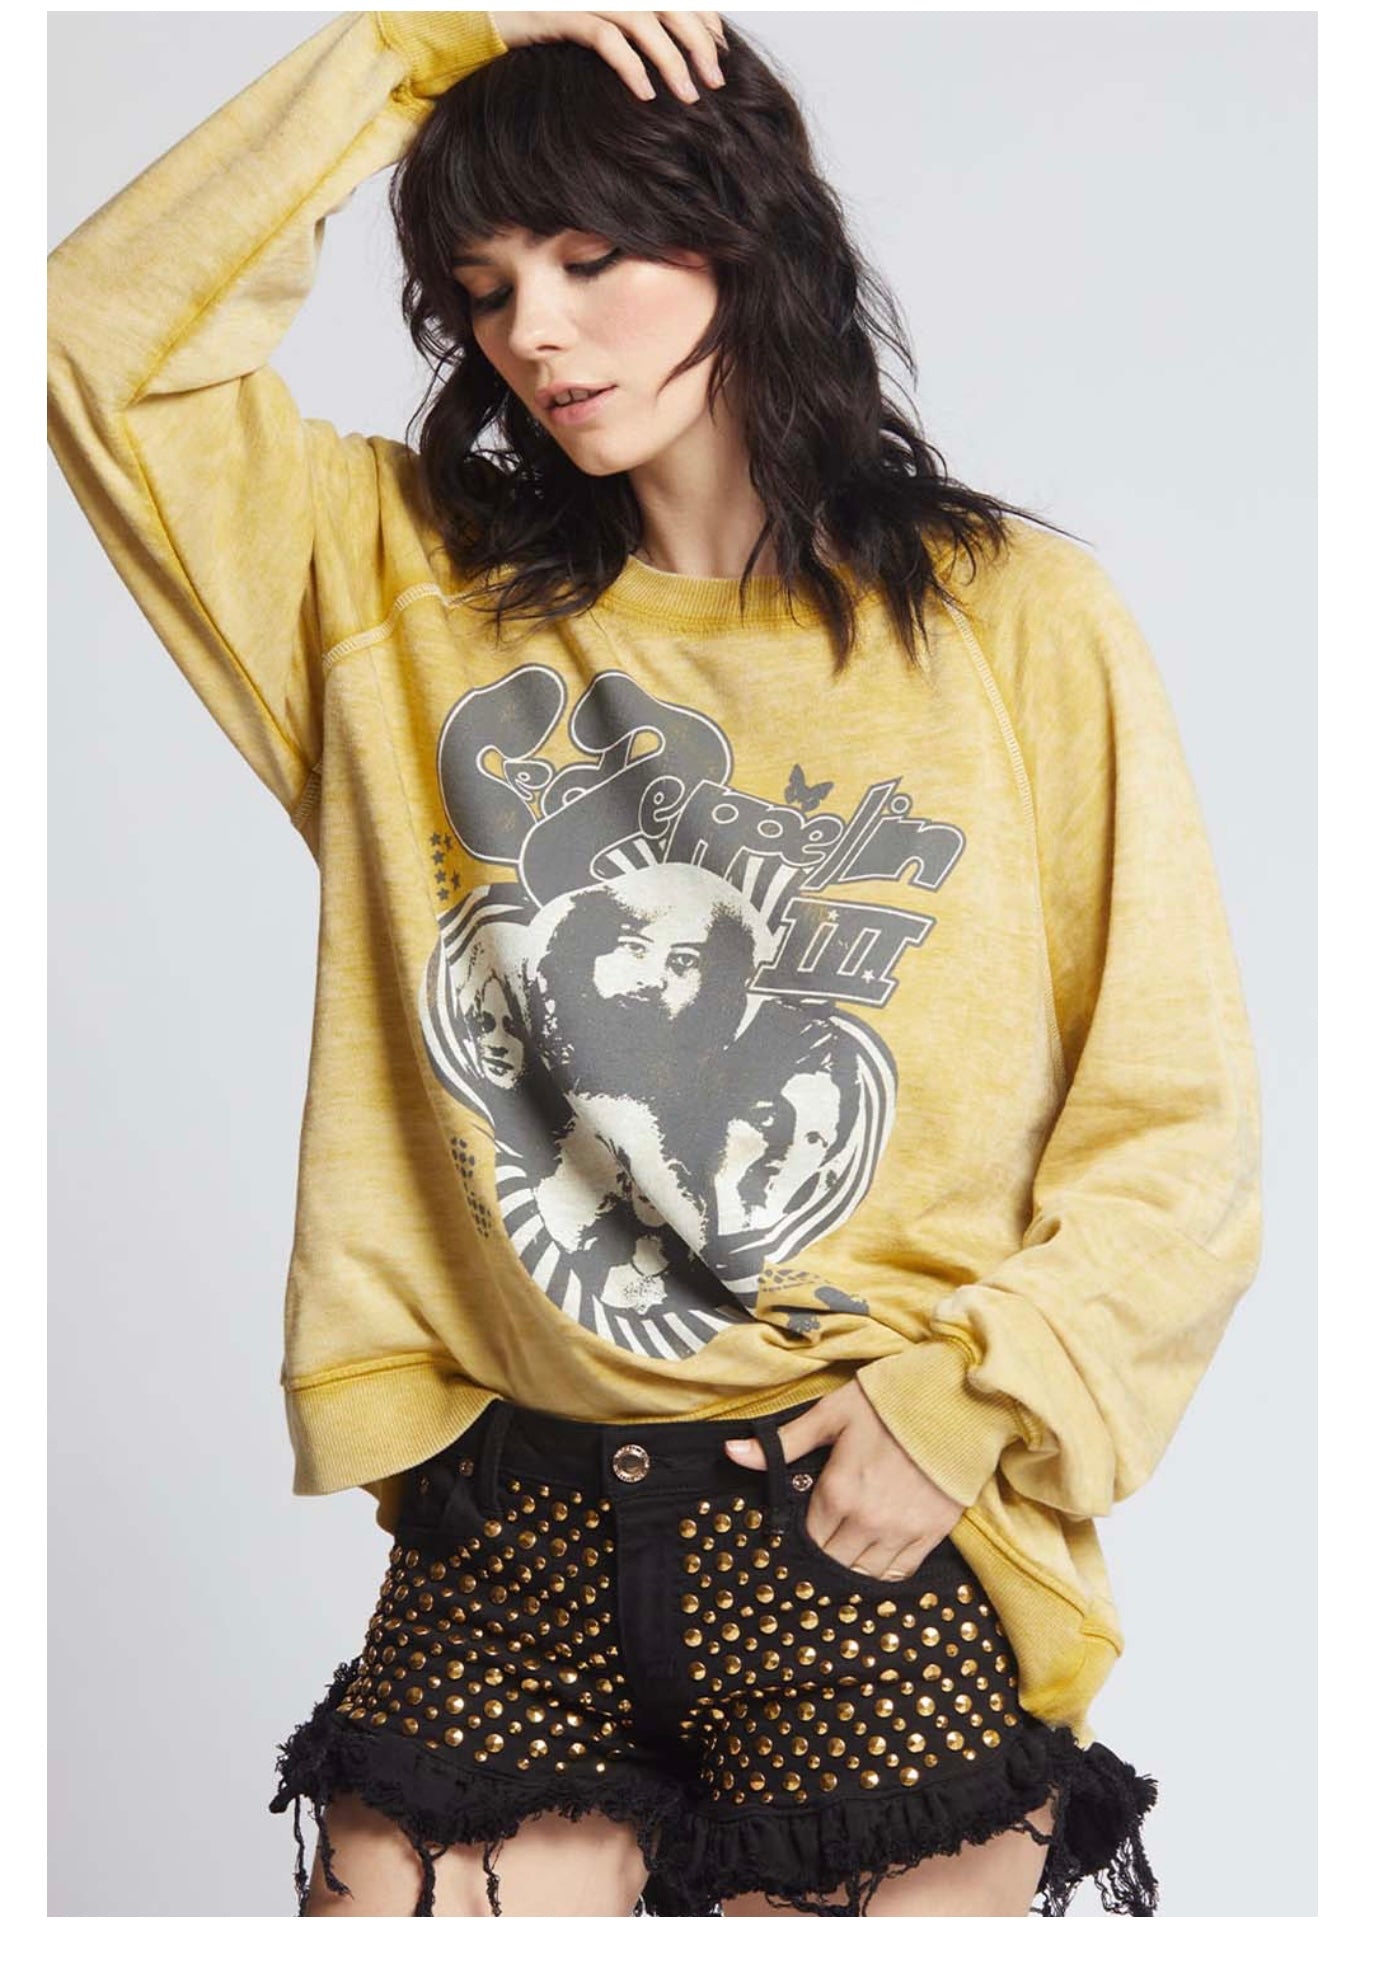  Classic Led Zeppelin Sweatshirt by Recycled Karma at Dilaru Boutique Nutley NJ